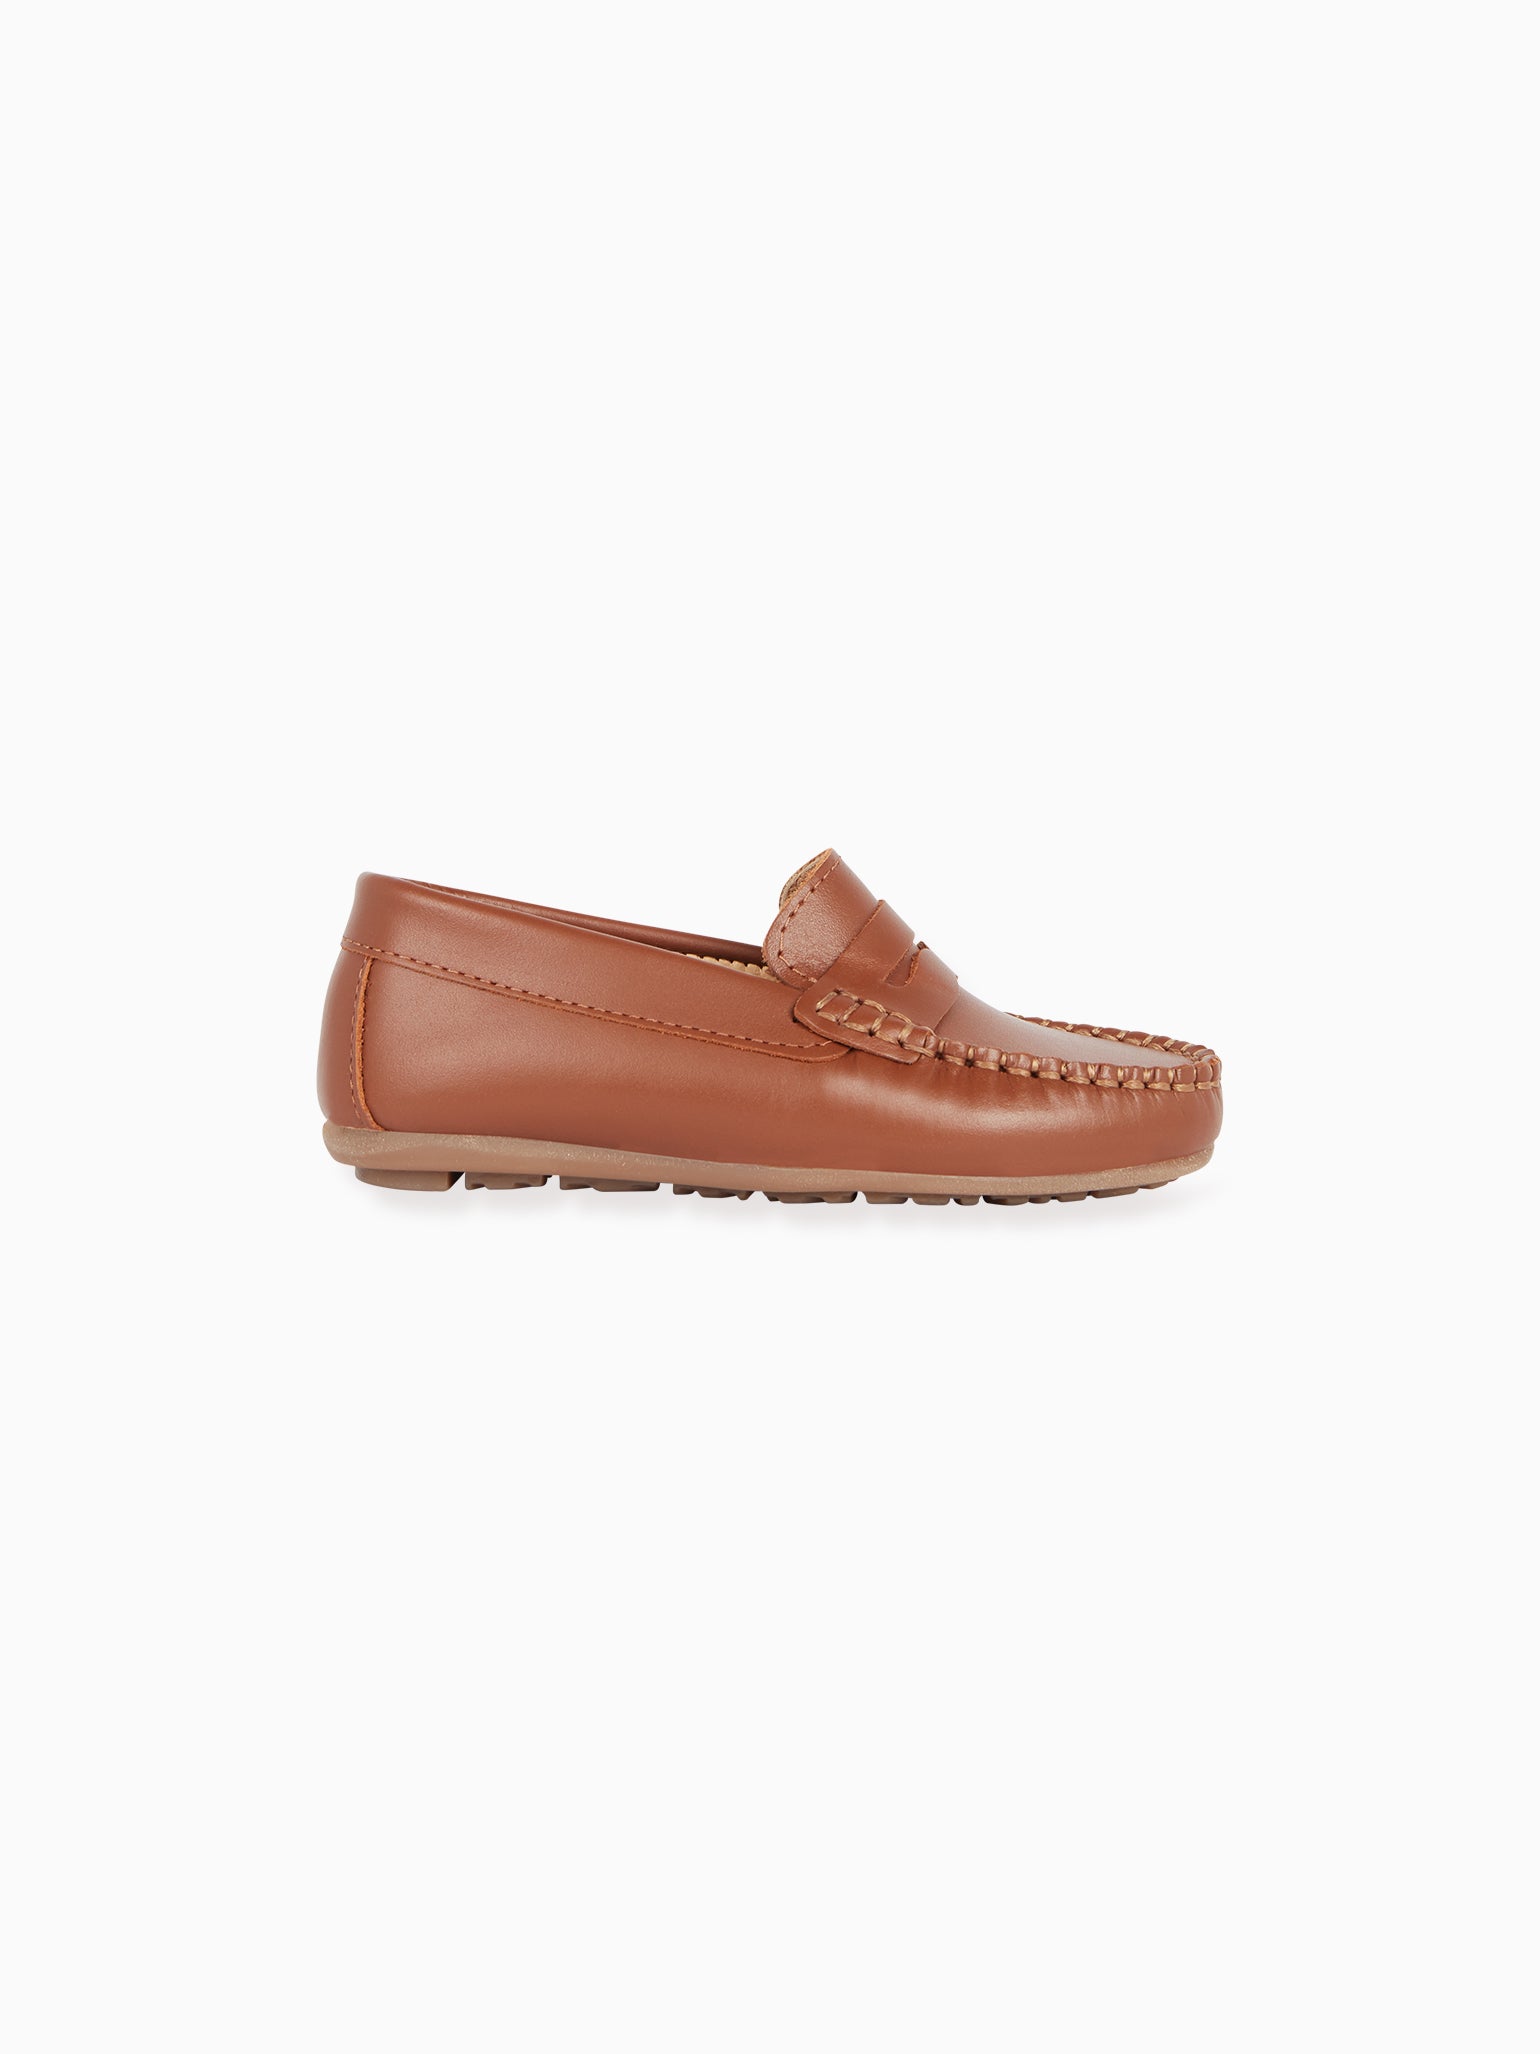 Tan Leather Boy Loafer Shoes